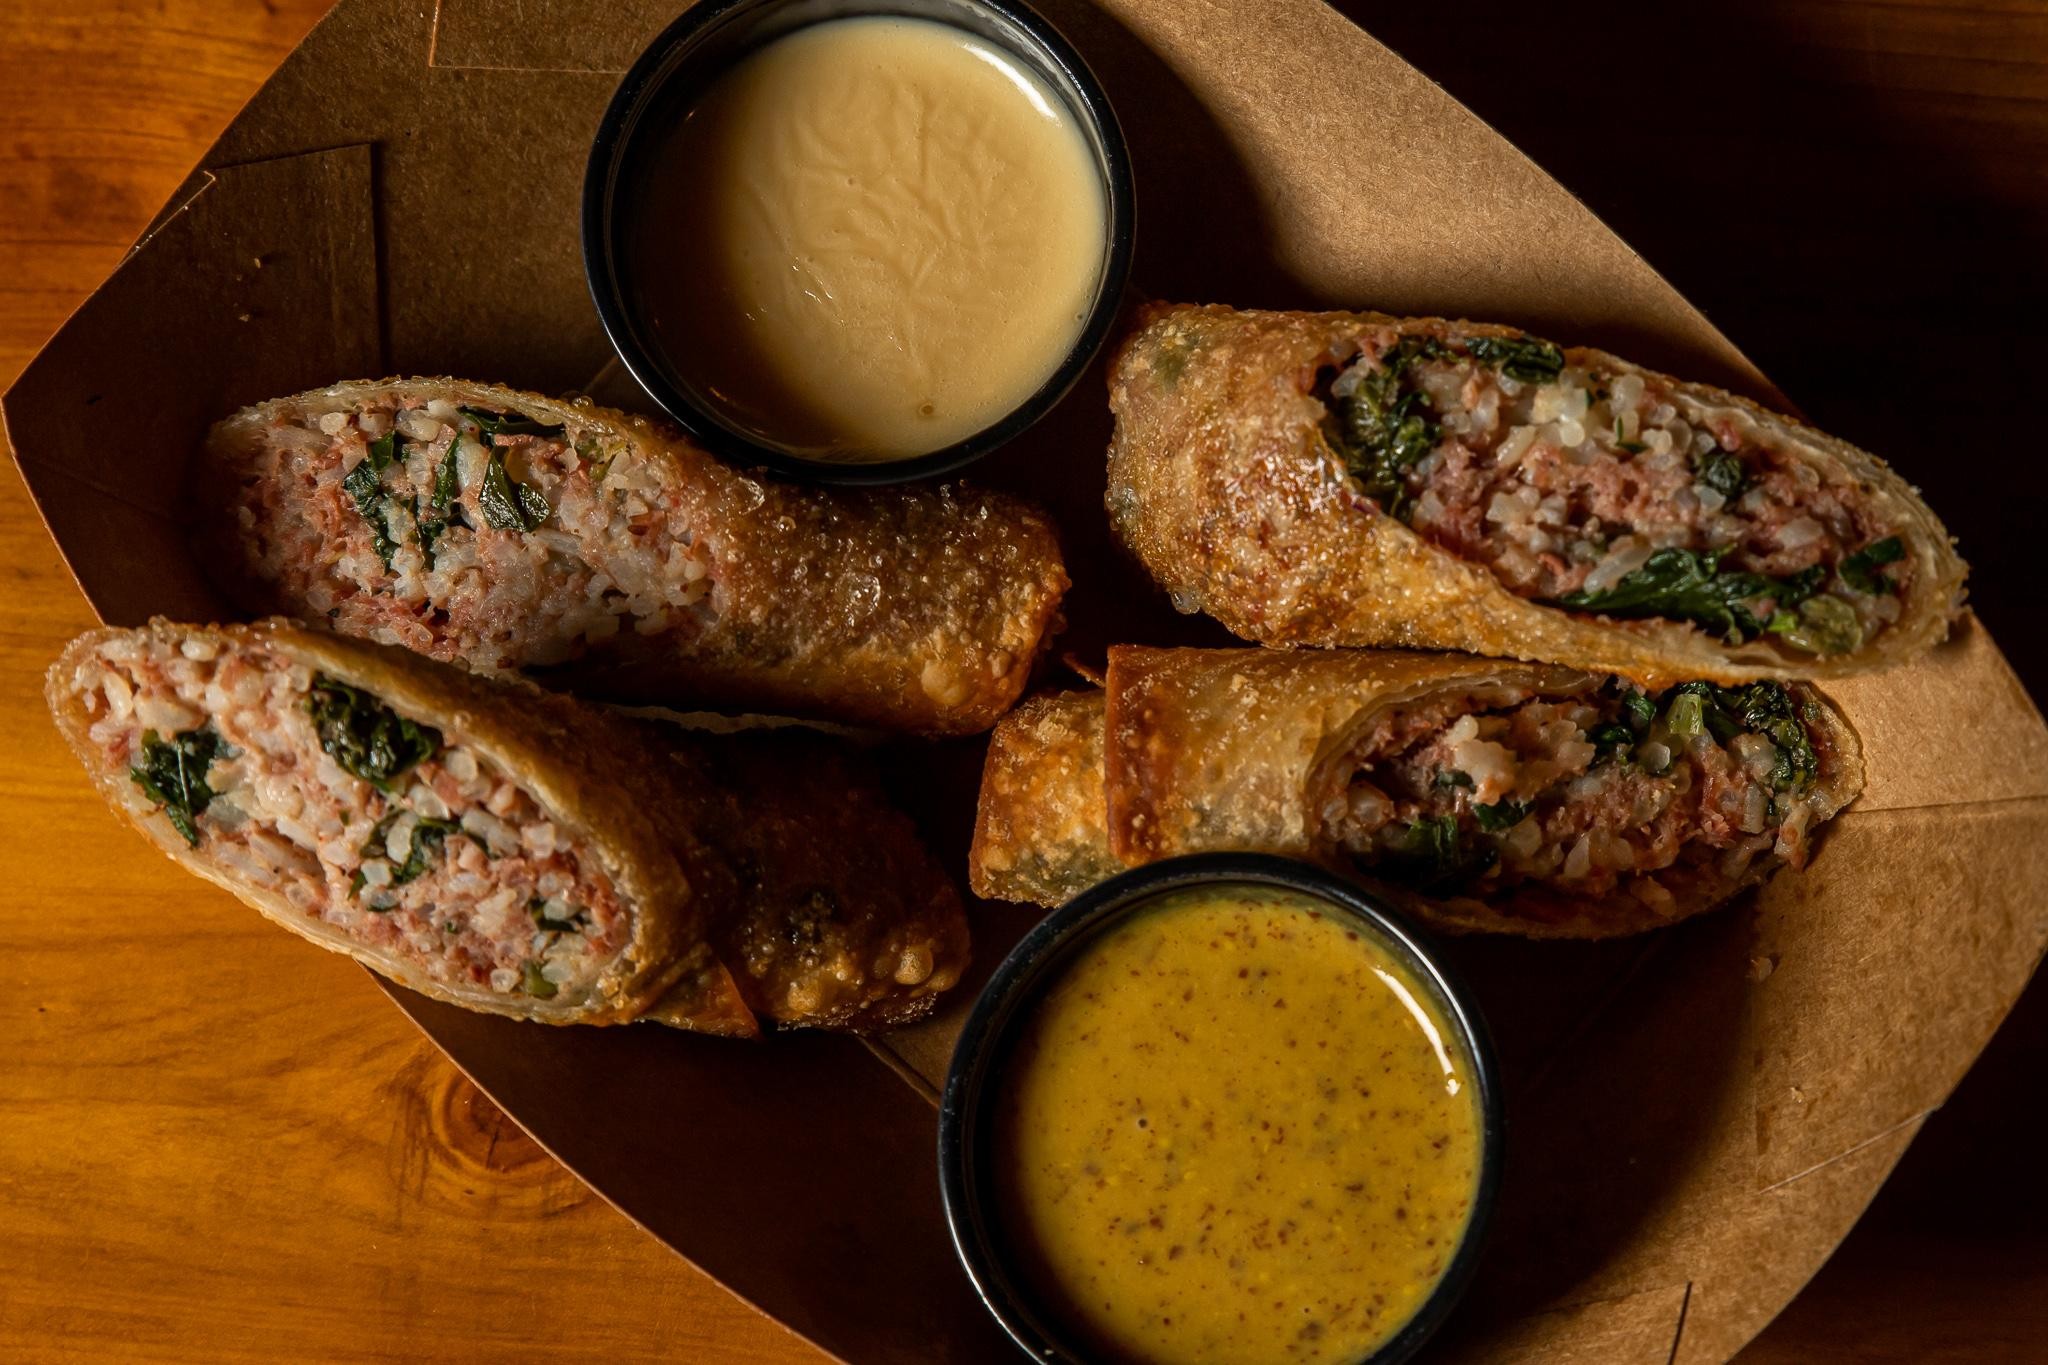 Feta and Herb Egg Rolls - West of the Loop